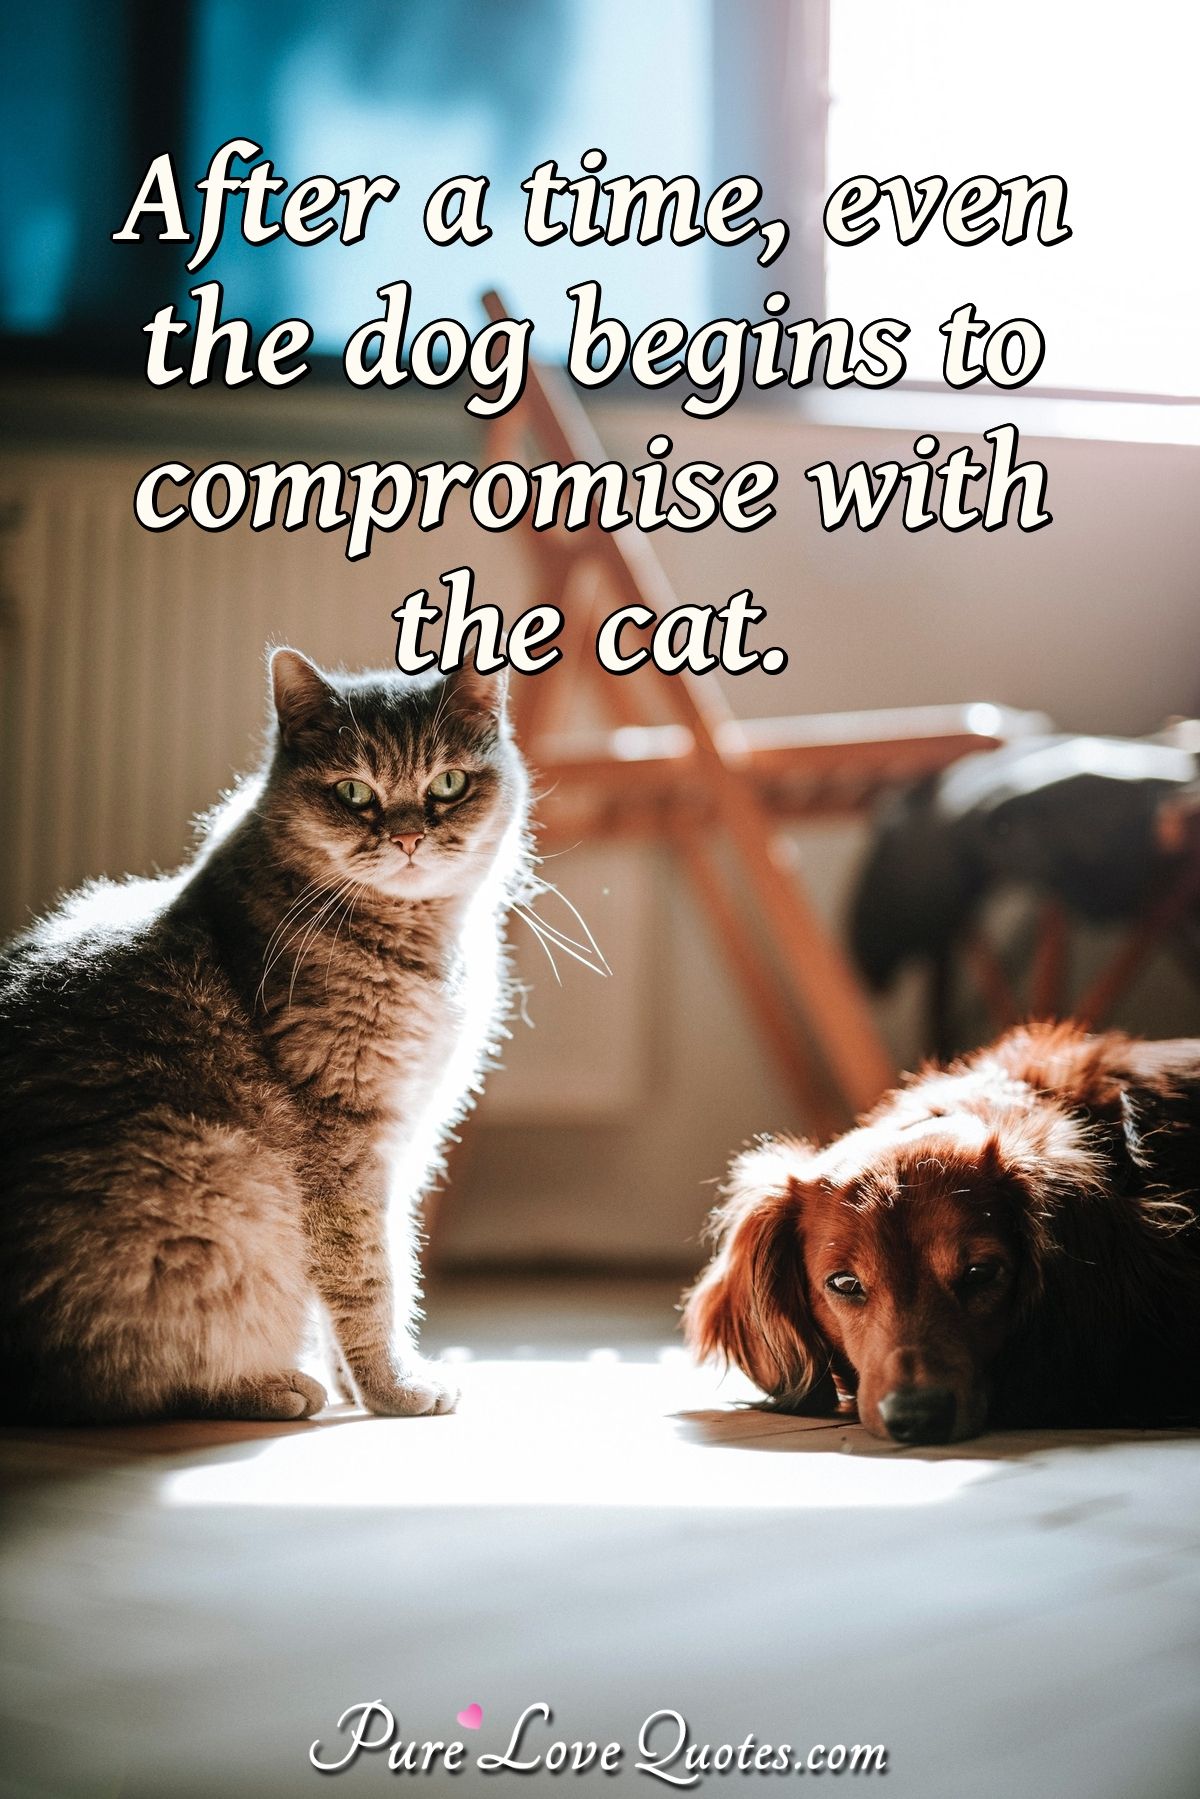 After a time, even the dog begins to compromise with the cat. |  PureLoveQuotes